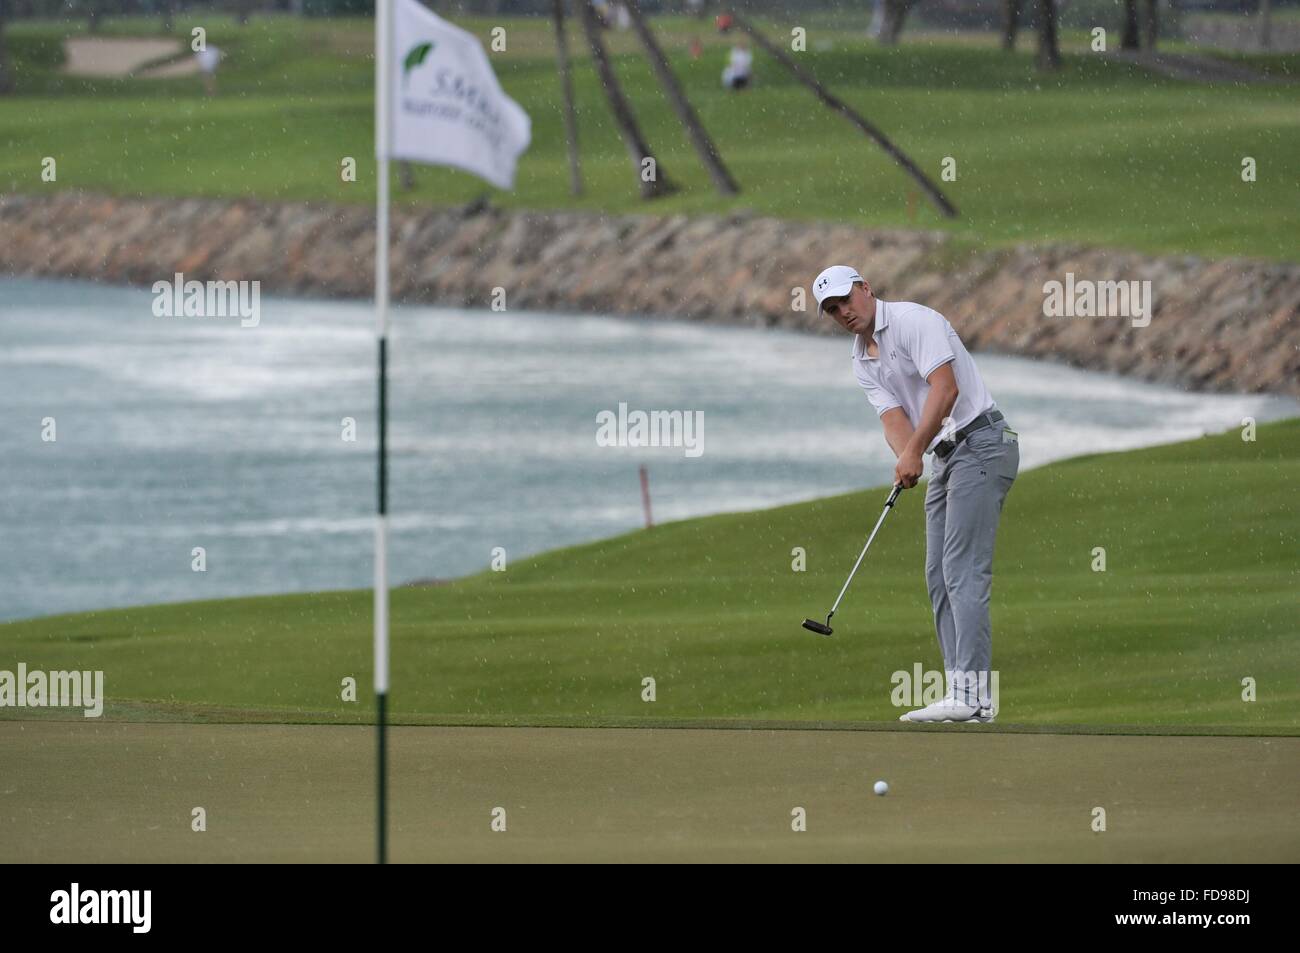 Singapore, Singapore. 29th Jan, 2016. Jordan Spieth of the United States competes during the SMBC Singapore Open held at Sentosa Golf Club Serapong course, Singapore, Jan. 29, 2016. Credit:  Then Chih Wey/Xinhua/Alamy Live News Stock Photo